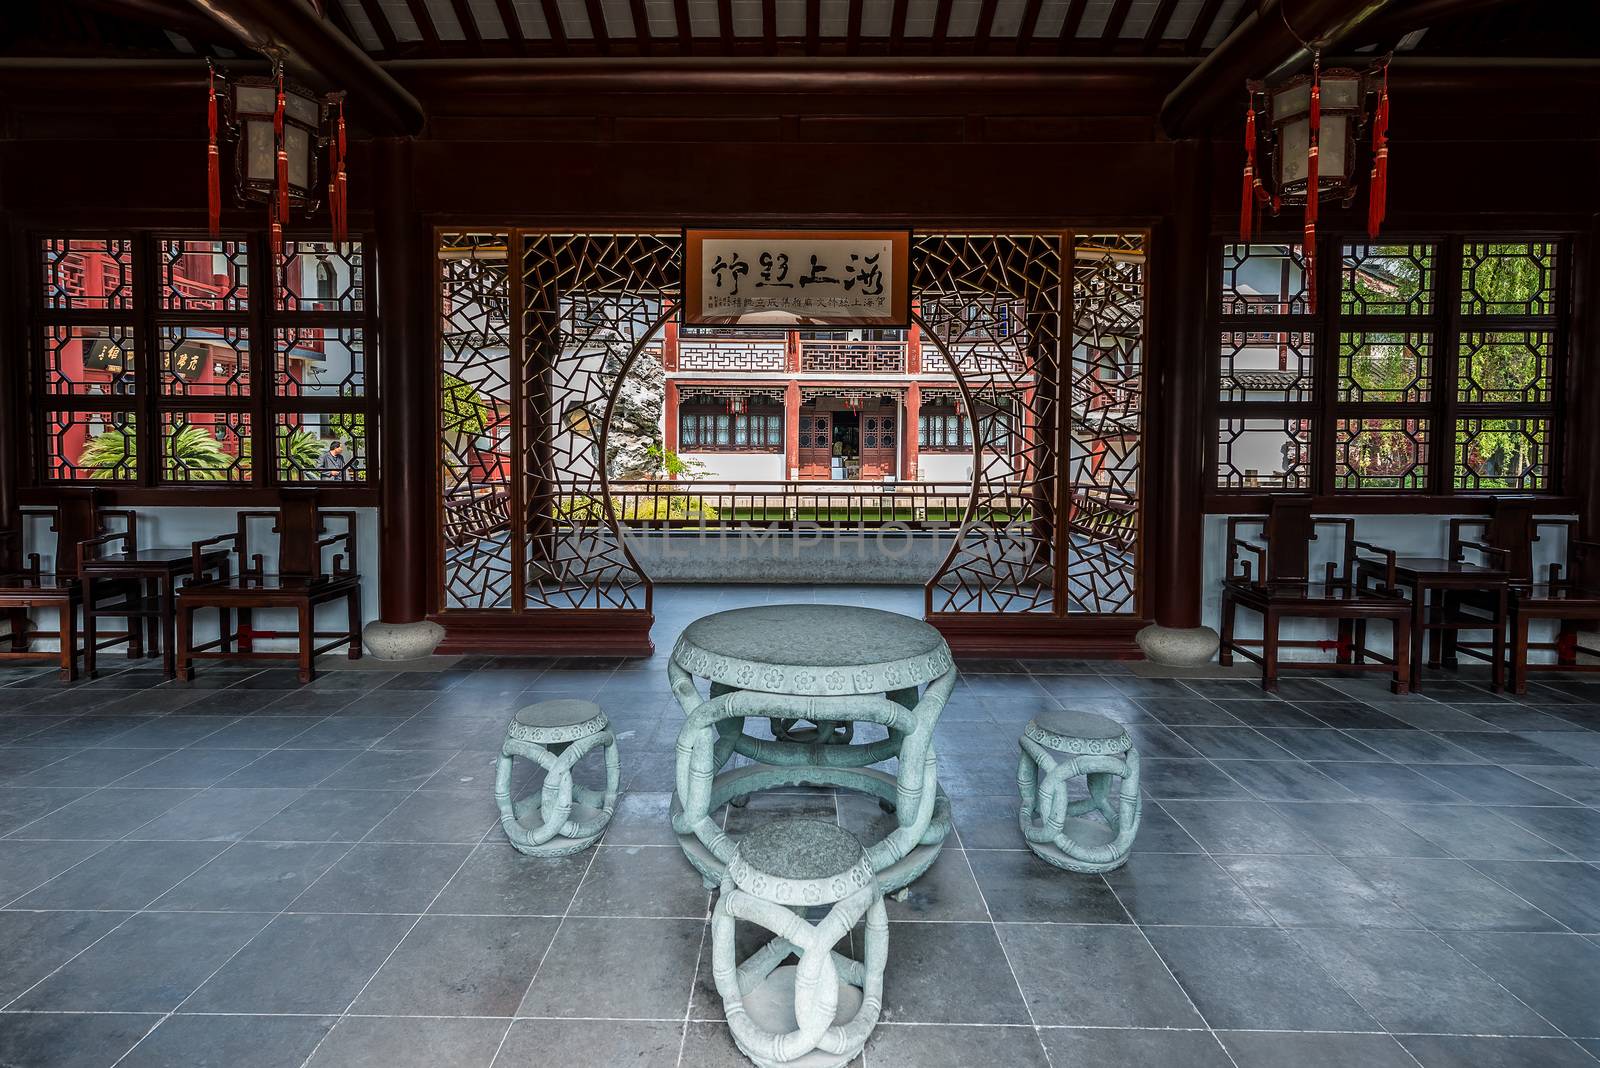 Wen Miao confucius temple Shanghai China by PIXSTILL